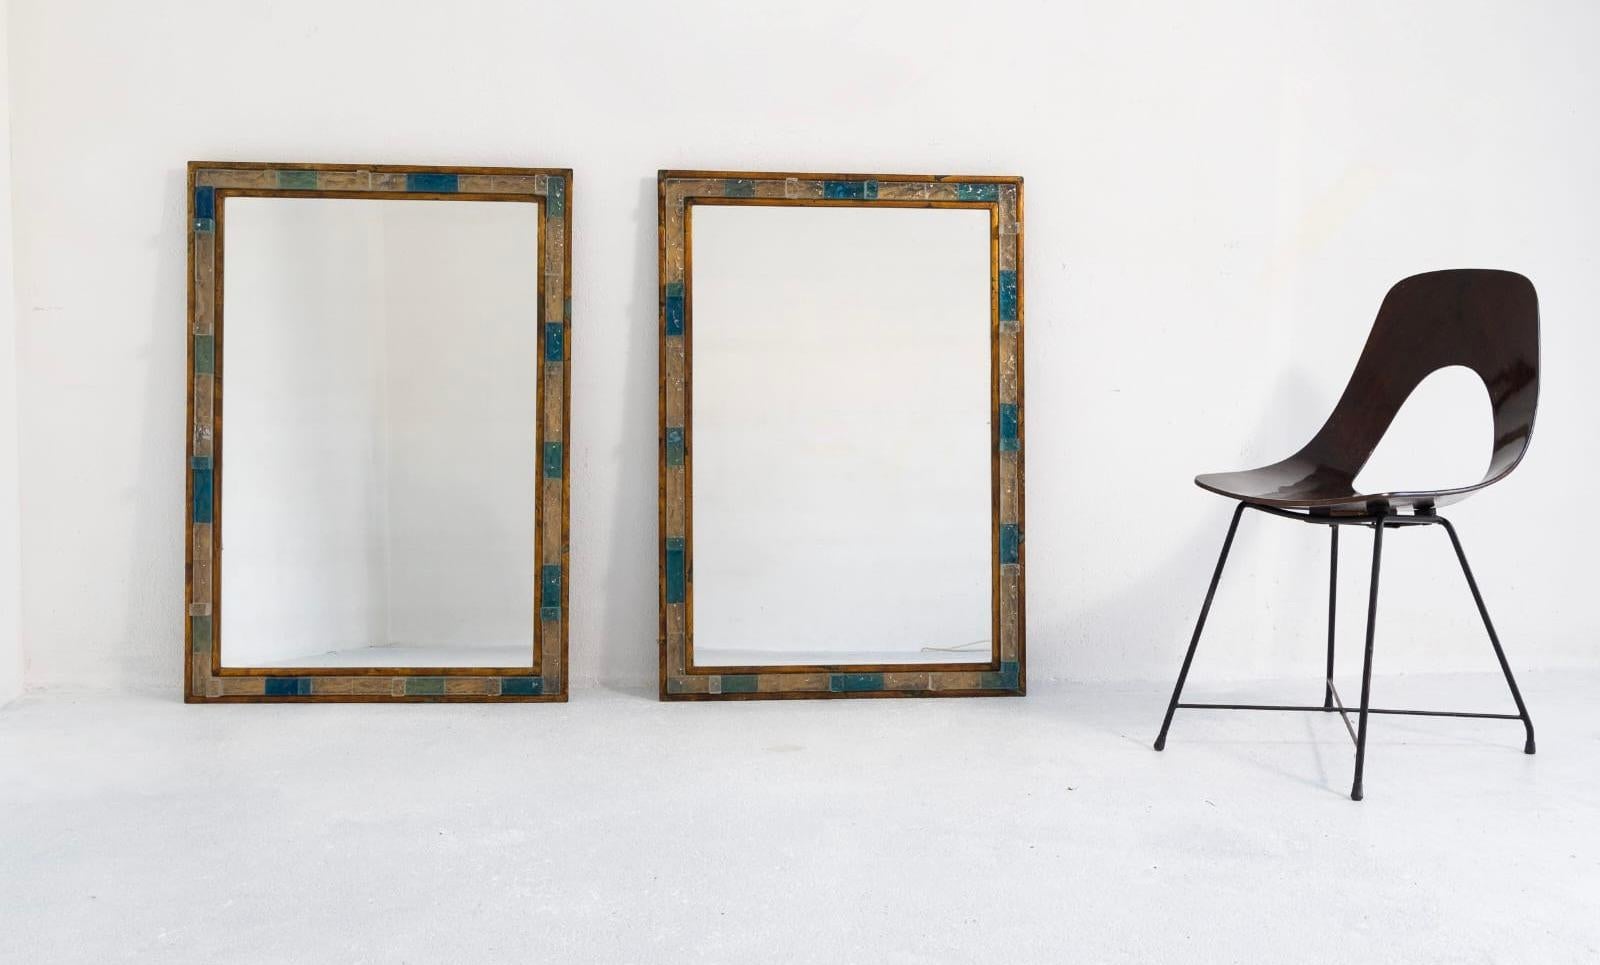 Blue Hammered Glass Gilt Wrought Iron Mirror by Poliarte, Italy, 1970s For Sale 2